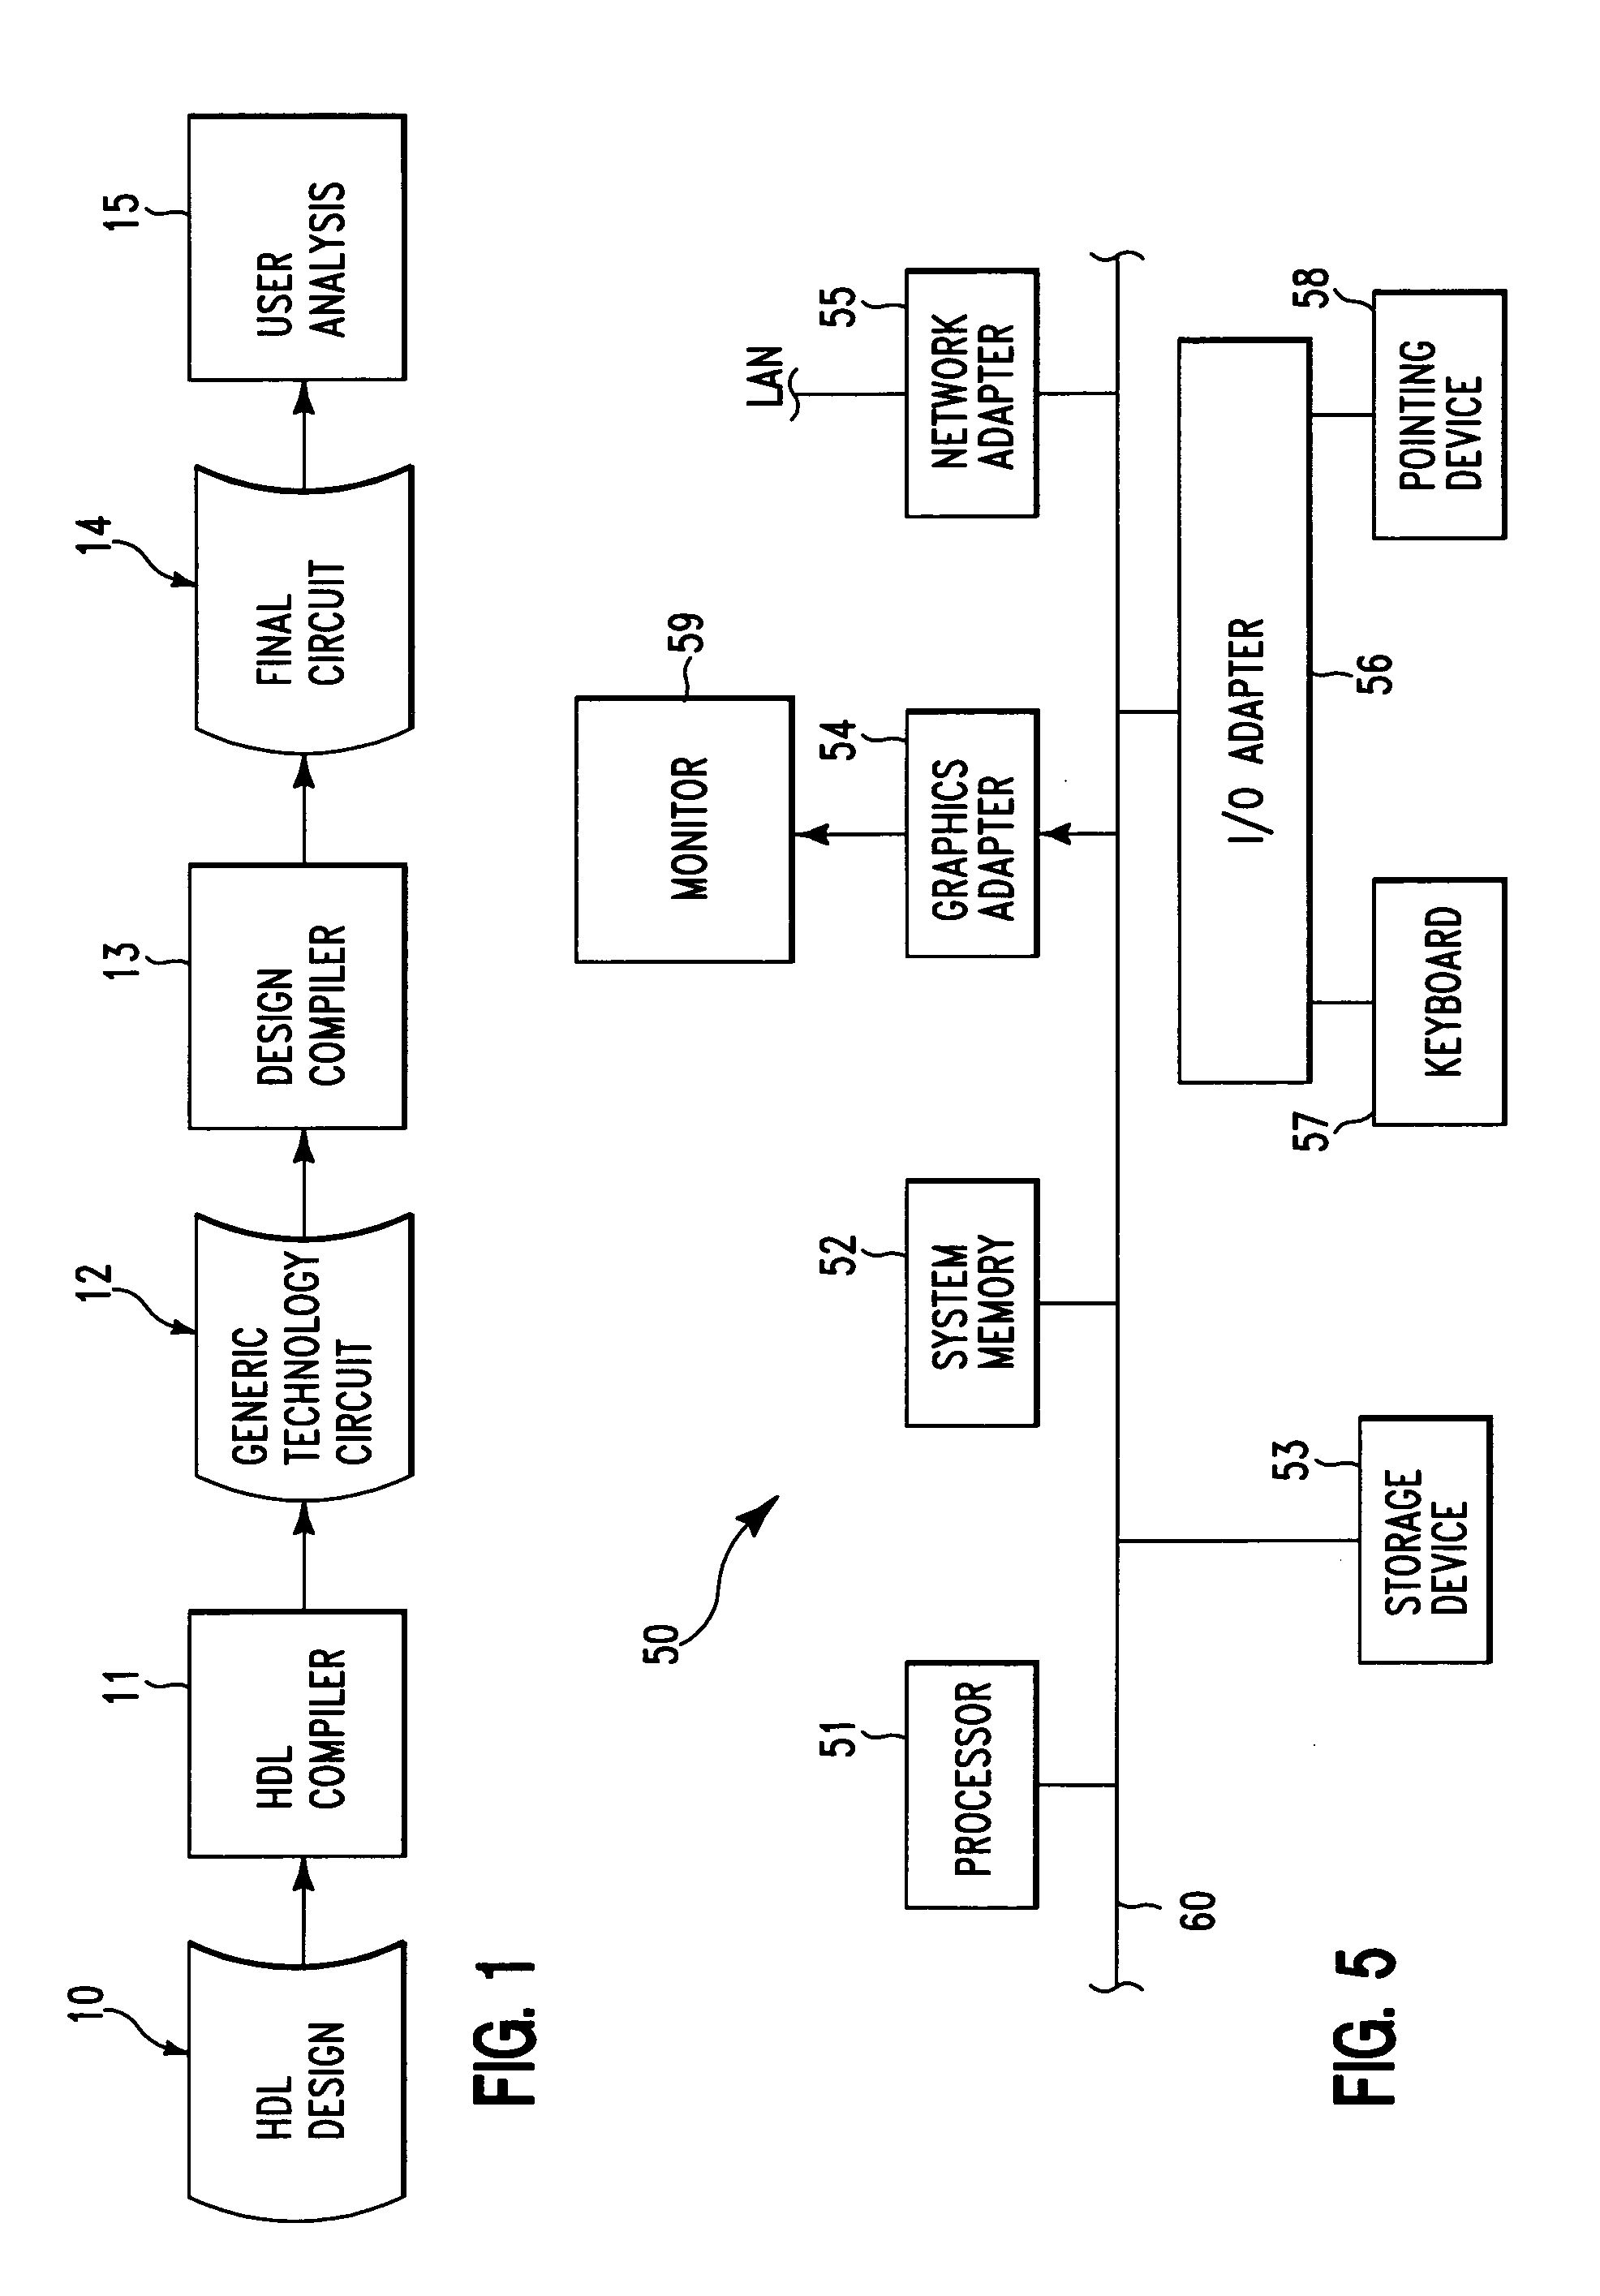 Method and system for performing static timing analysis on digital electronic circuits